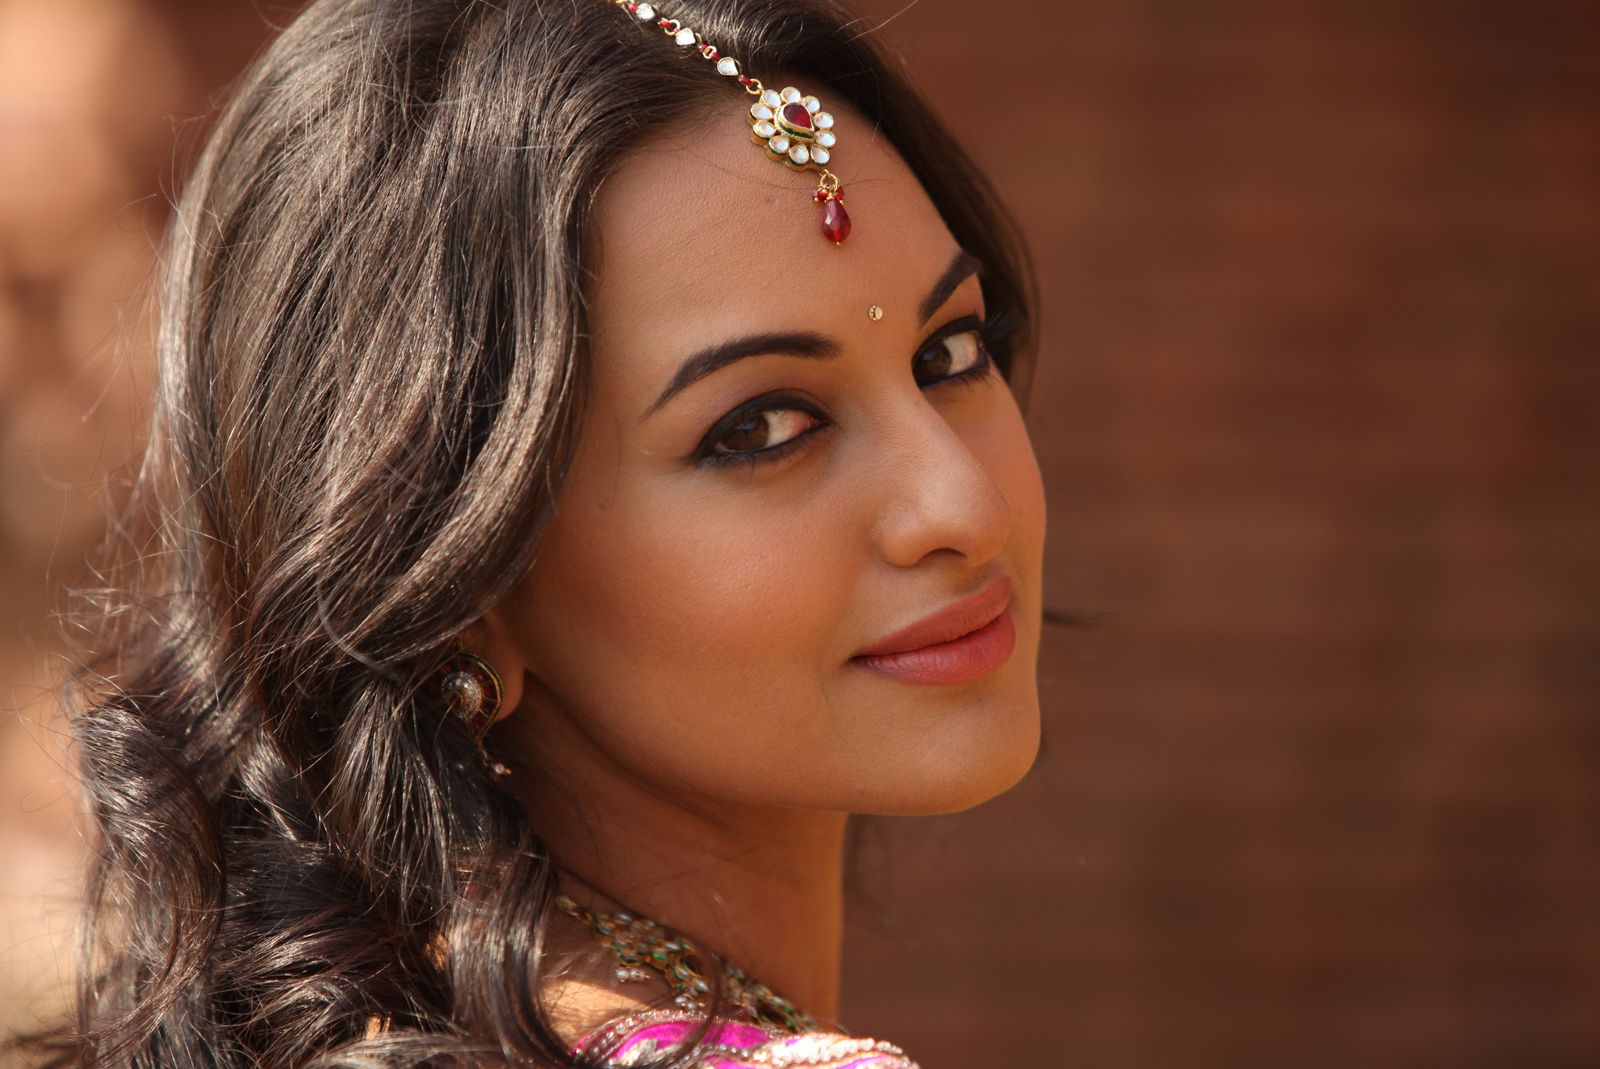 Sonakshi Sinha has some surprise stored for this birthday?